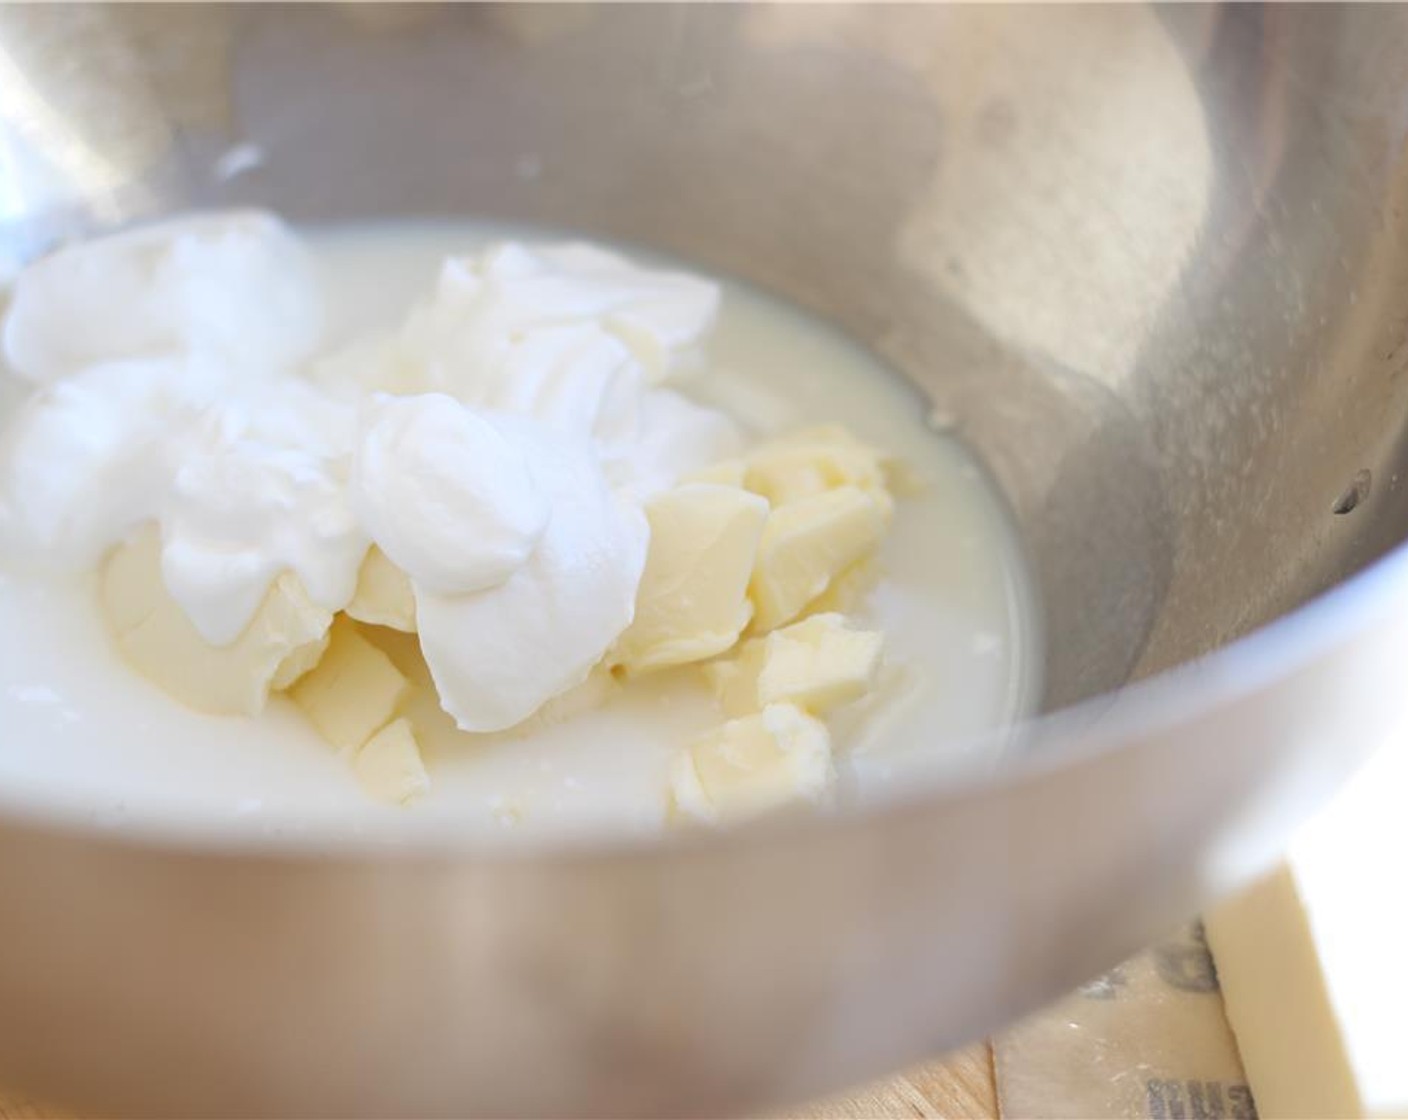 step 3 In a large mixing bowl, combine the Unsalted Butter (1/3 cup), Eggs (2), Sour Cream (1/2 cup), and Milk (1/2 cup).